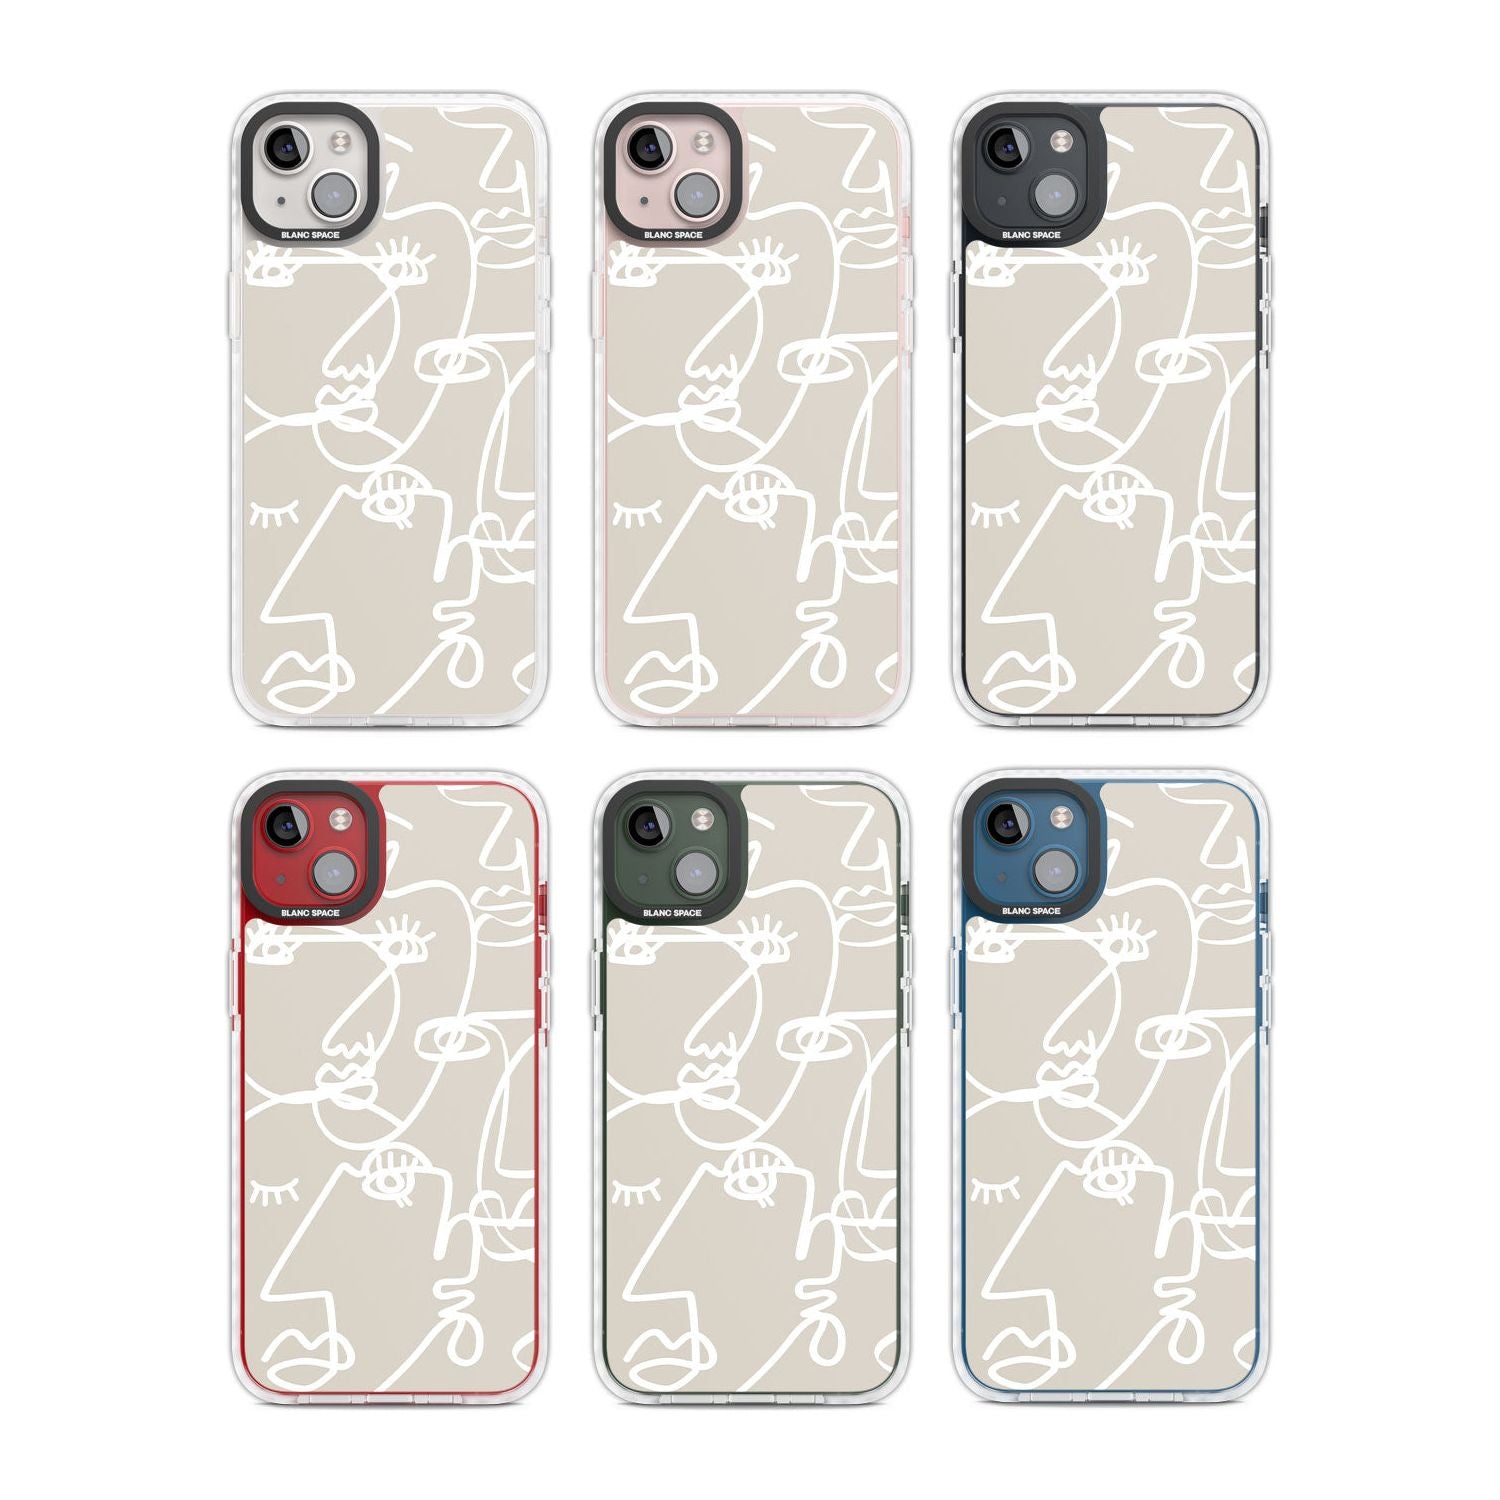 Abstract Continuous Line Faces White on Beige Phone Case iPhone 15 Pro Max / Black Impact Case,iPhone 15 Plus / Black Impact Case,iPhone 15 Pro / Black Impact Case,iPhone 15 / Black Impact Case,iPhone 15 Pro Max / Impact Case,iPhone 15 Plus / Impact Case,iPhone 15 Pro / Impact Case,iPhone 15 / Impact Case,iPhone 15 Pro Max / Magsafe Black Impact Case,iPhone 15 Plus / Magsafe Black Impact Case,iPhone 15 Pro / Magsafe Black Impact Case,iPhone 15 / Magsafe Black Impact Case,iPhone 14 Pro Max / Black Impact Cas